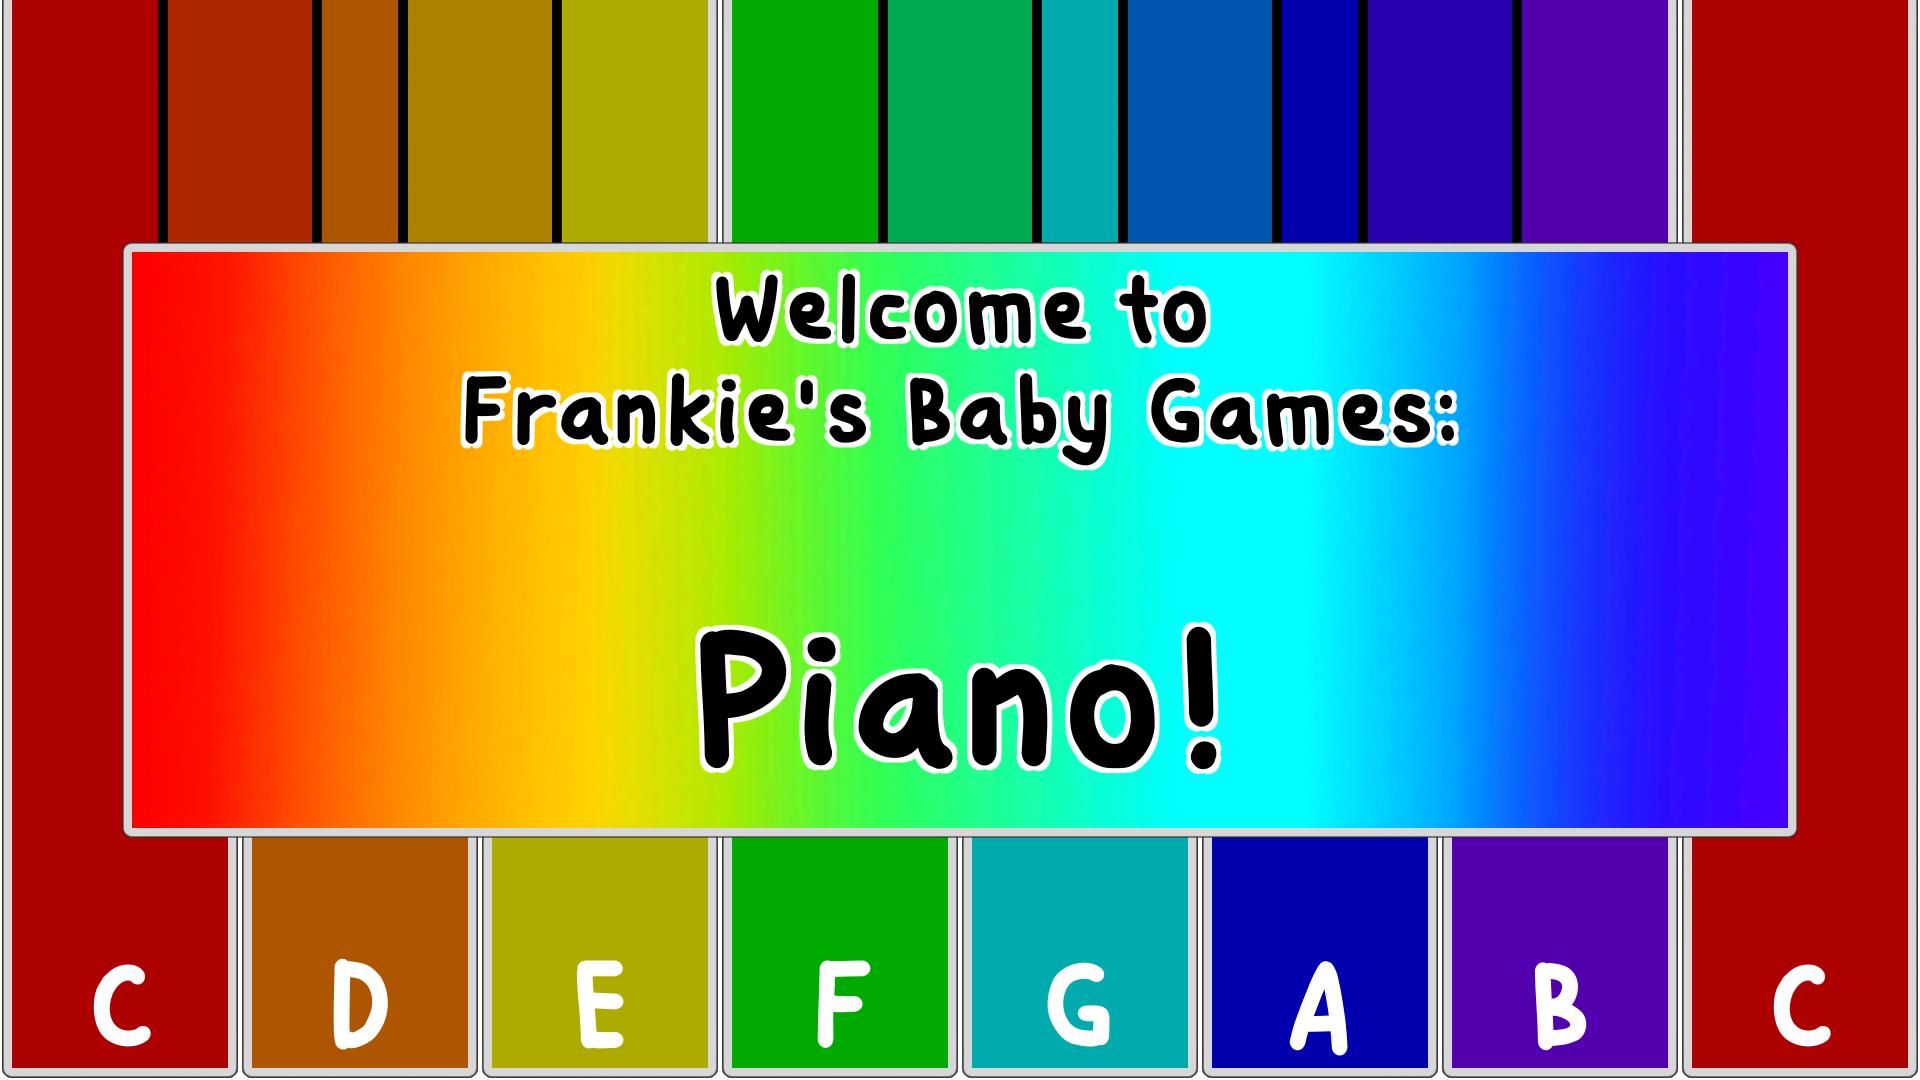 Frankie's Baby Games: Piano!